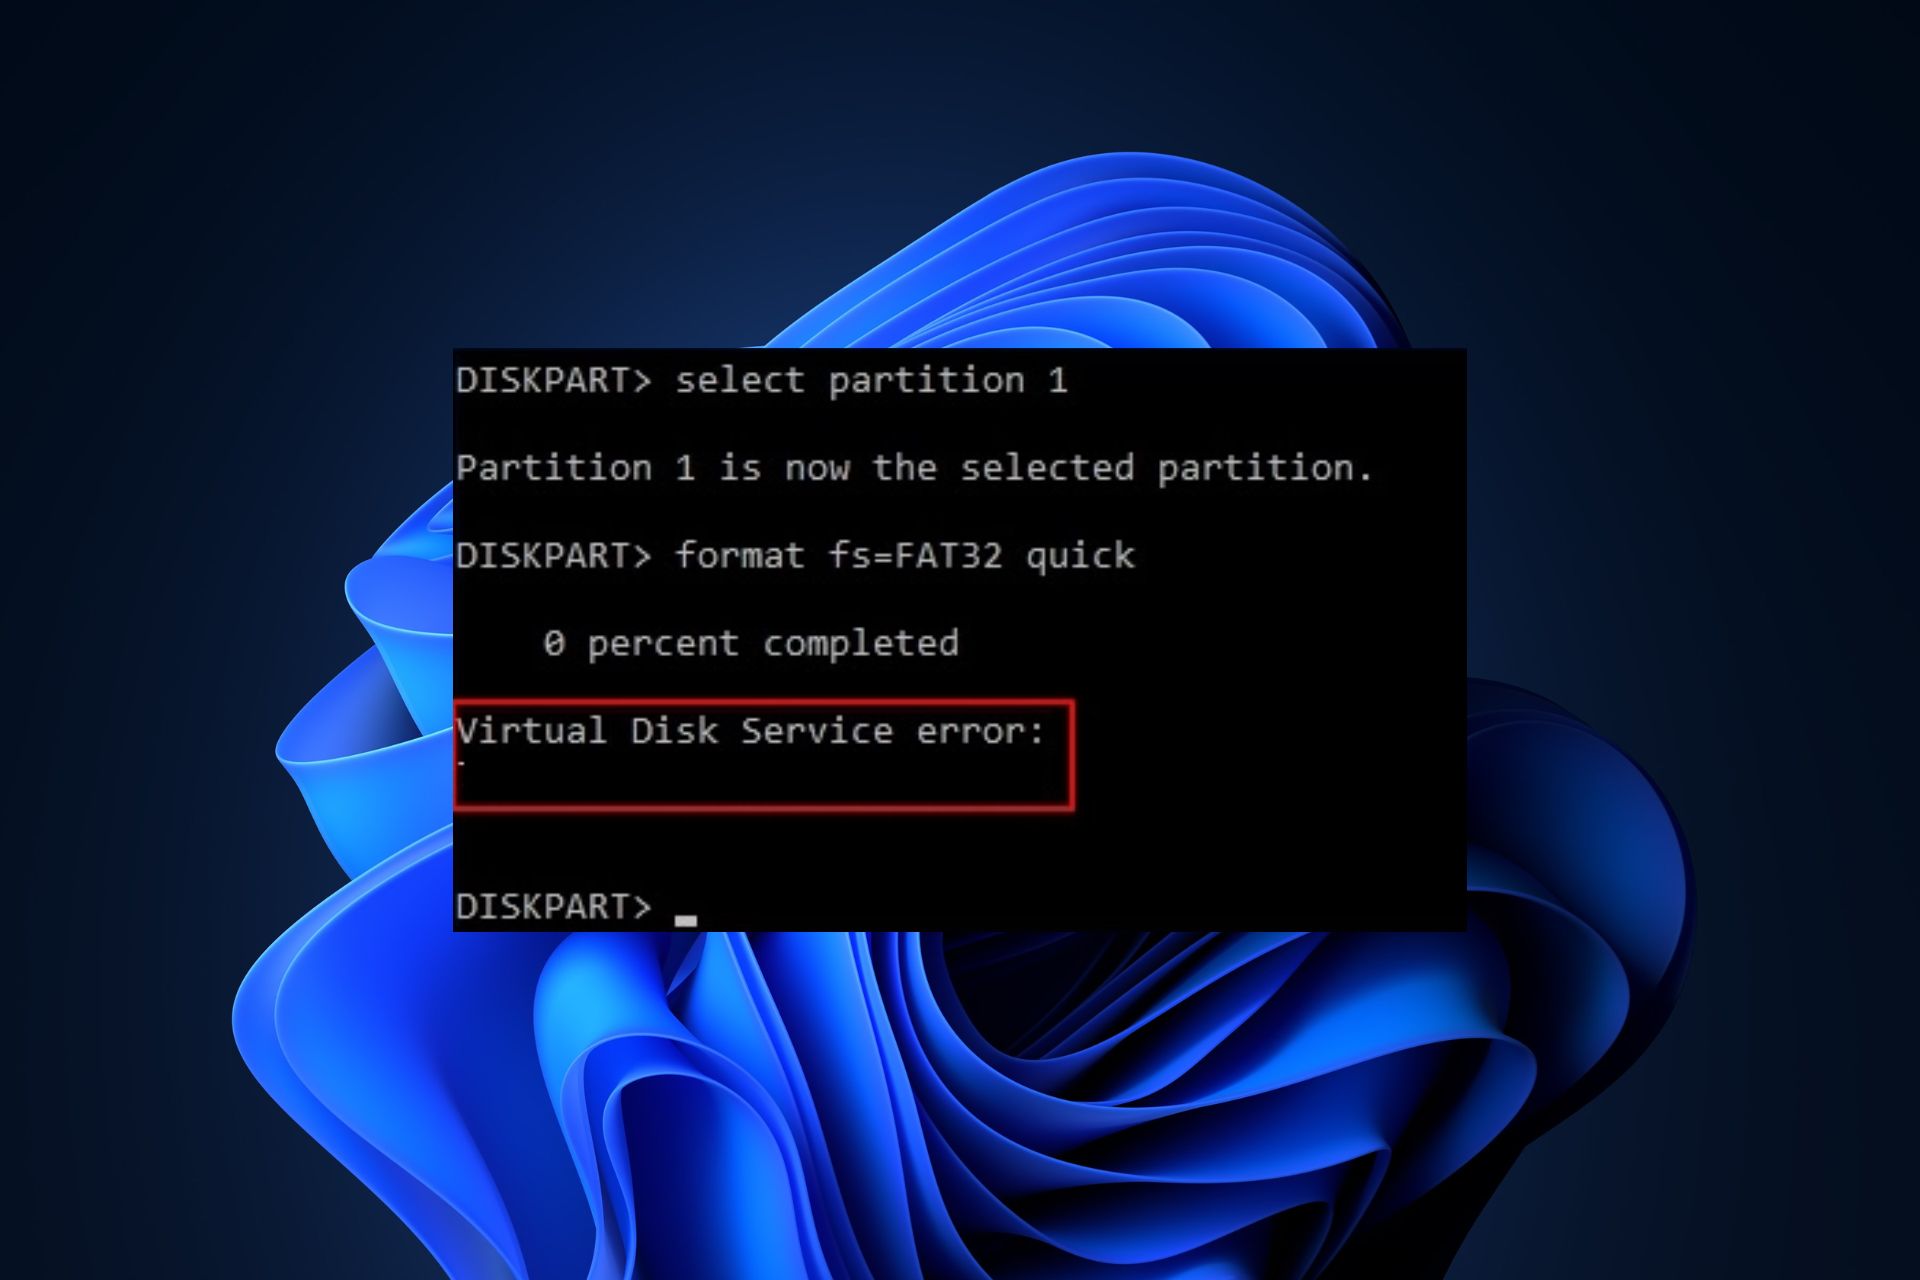 virtual disk service error: the operation timed out